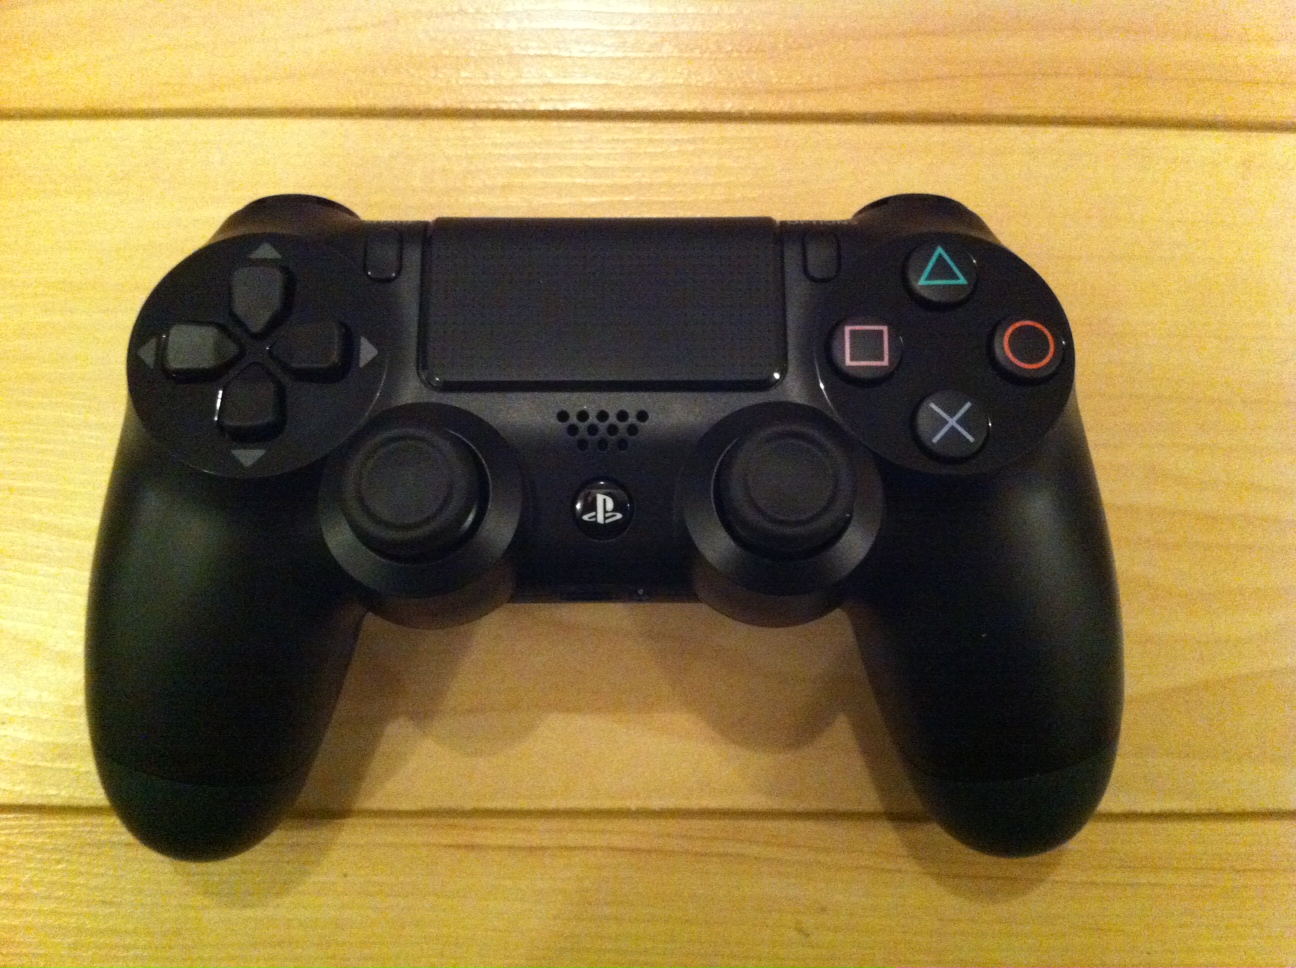 Partina City oxiderer kedelig Test Driving The DualShock 4 – In Third Person